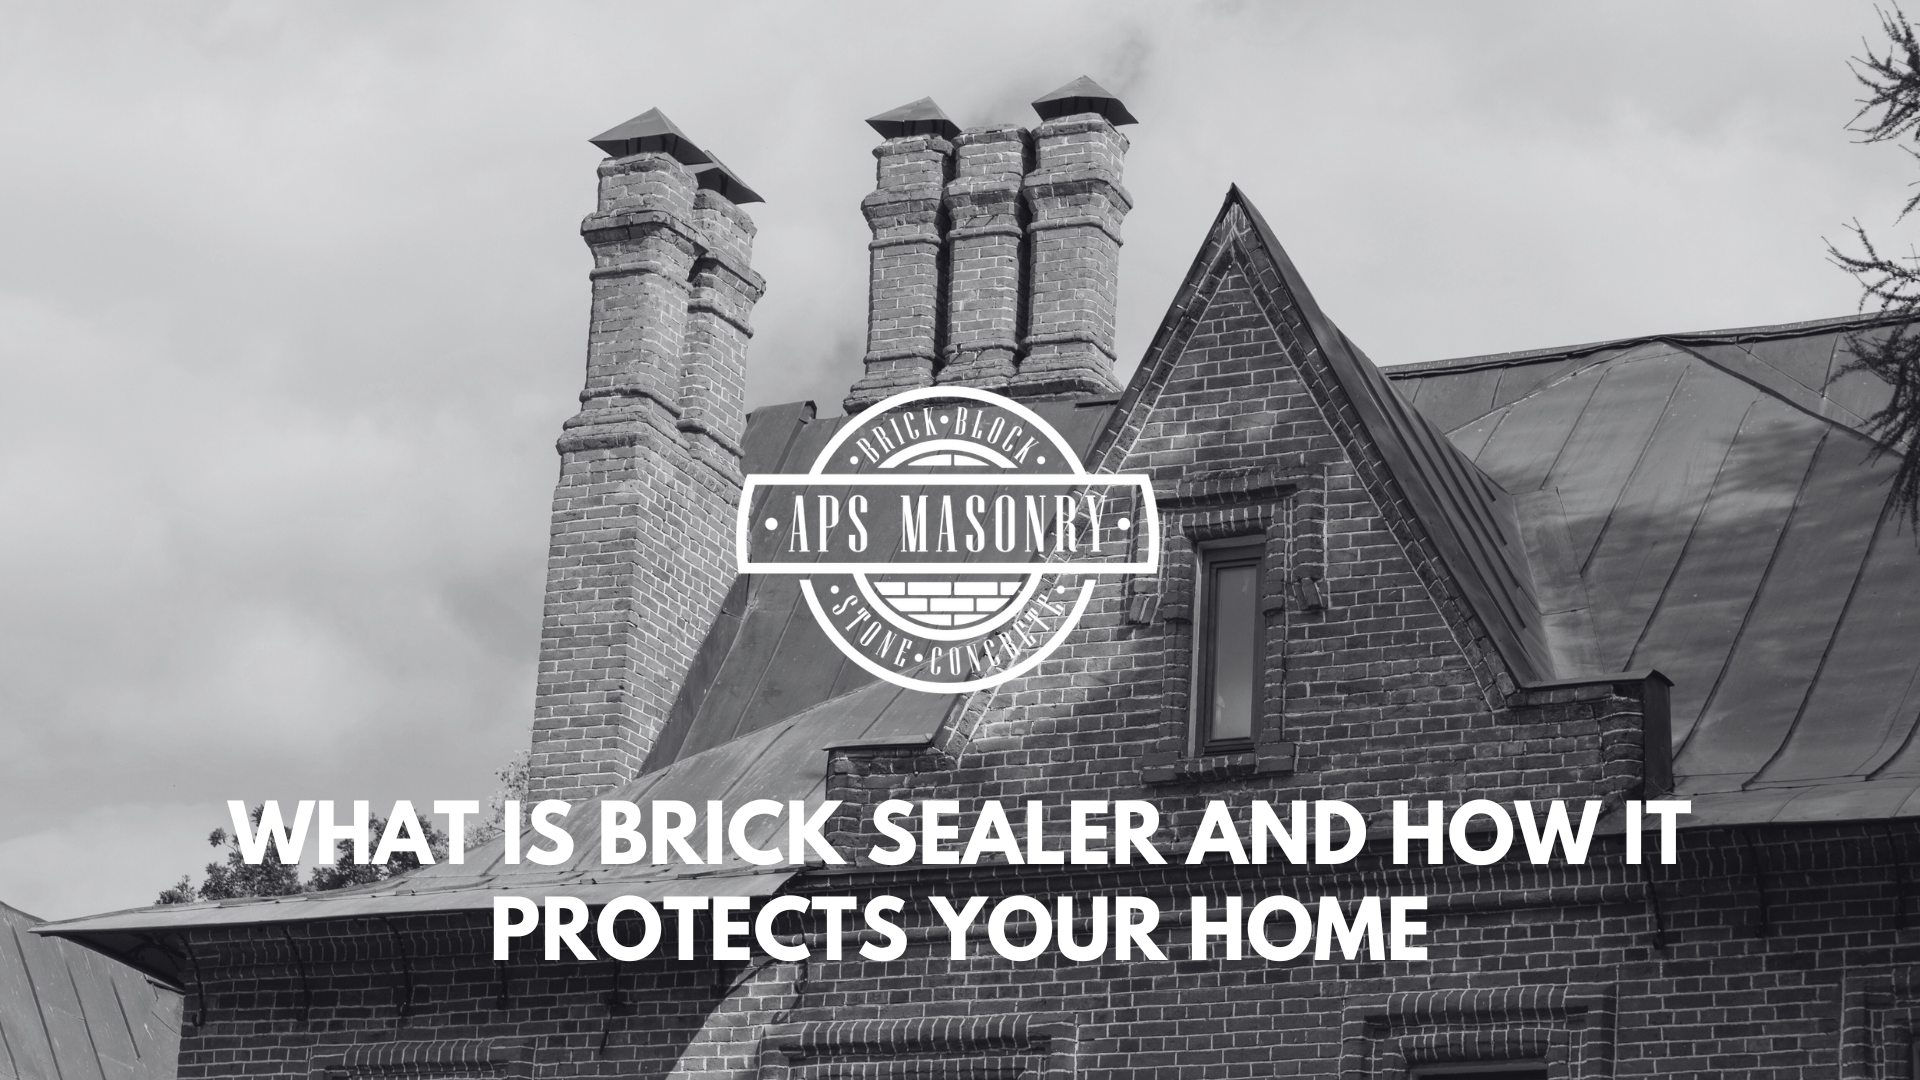 What Is Brick Sealer and How It Protects Your Home